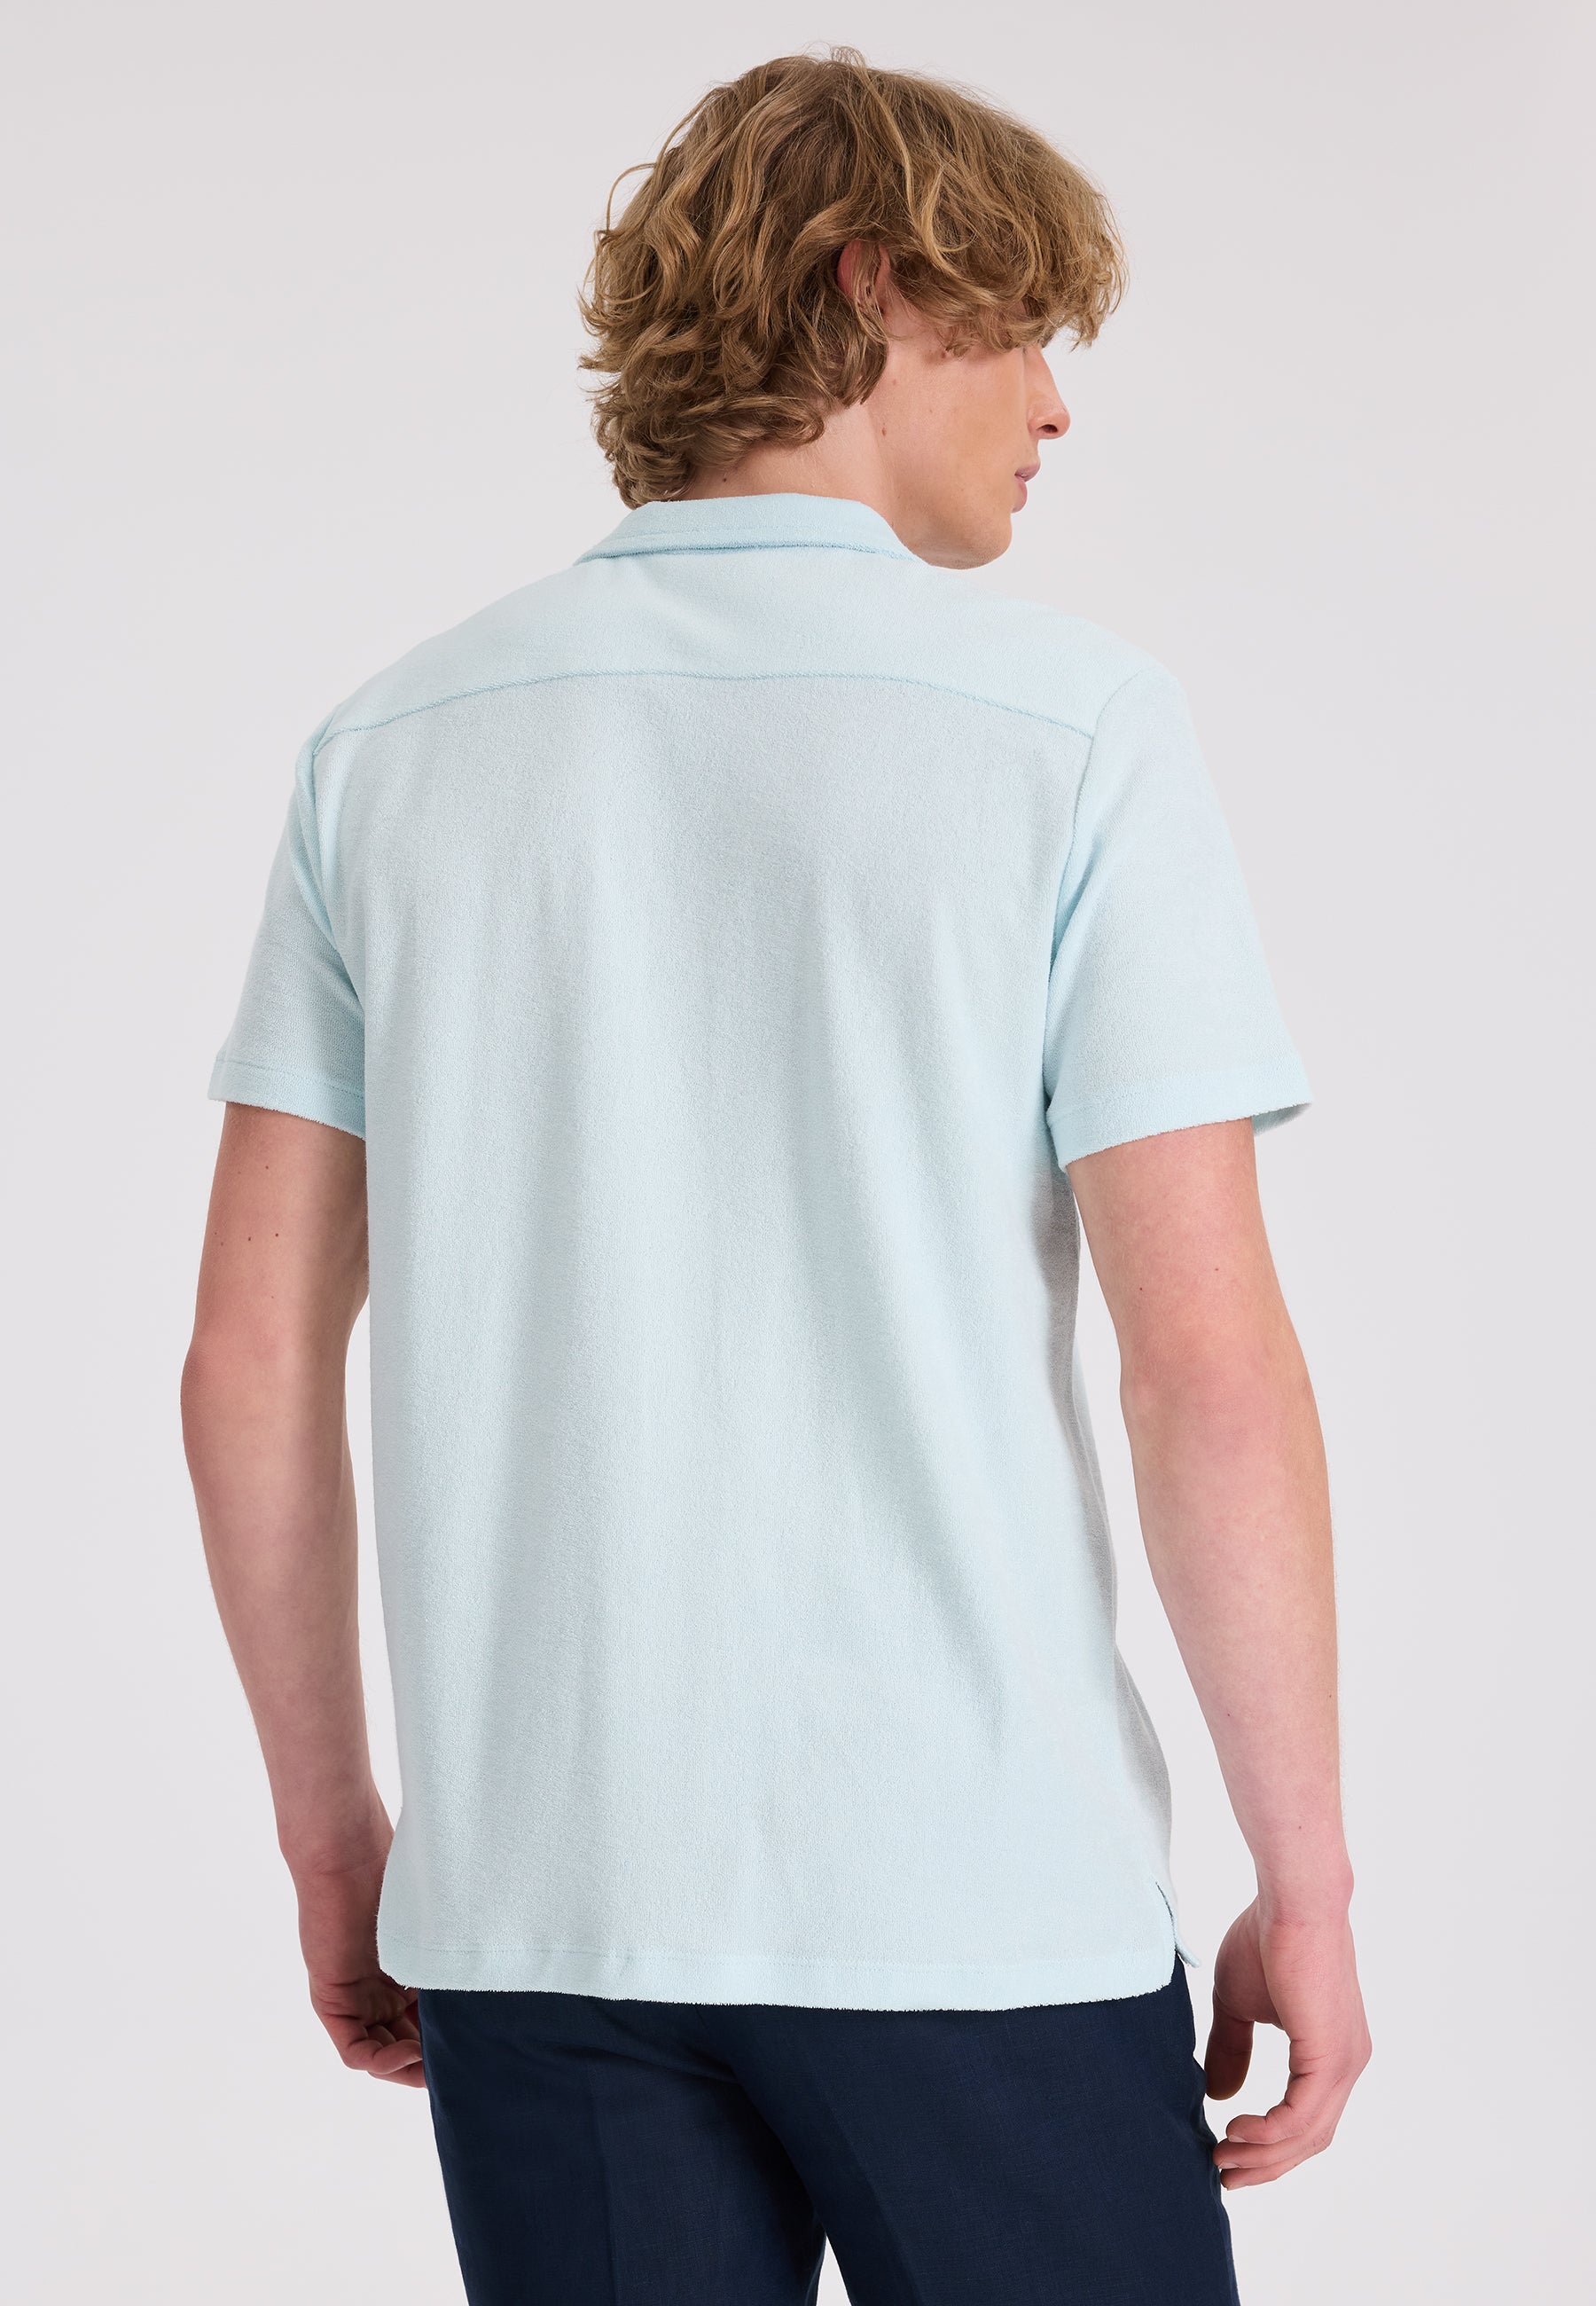 BREEZE TERRY TOWELLING S/S SHIRT in Skylight